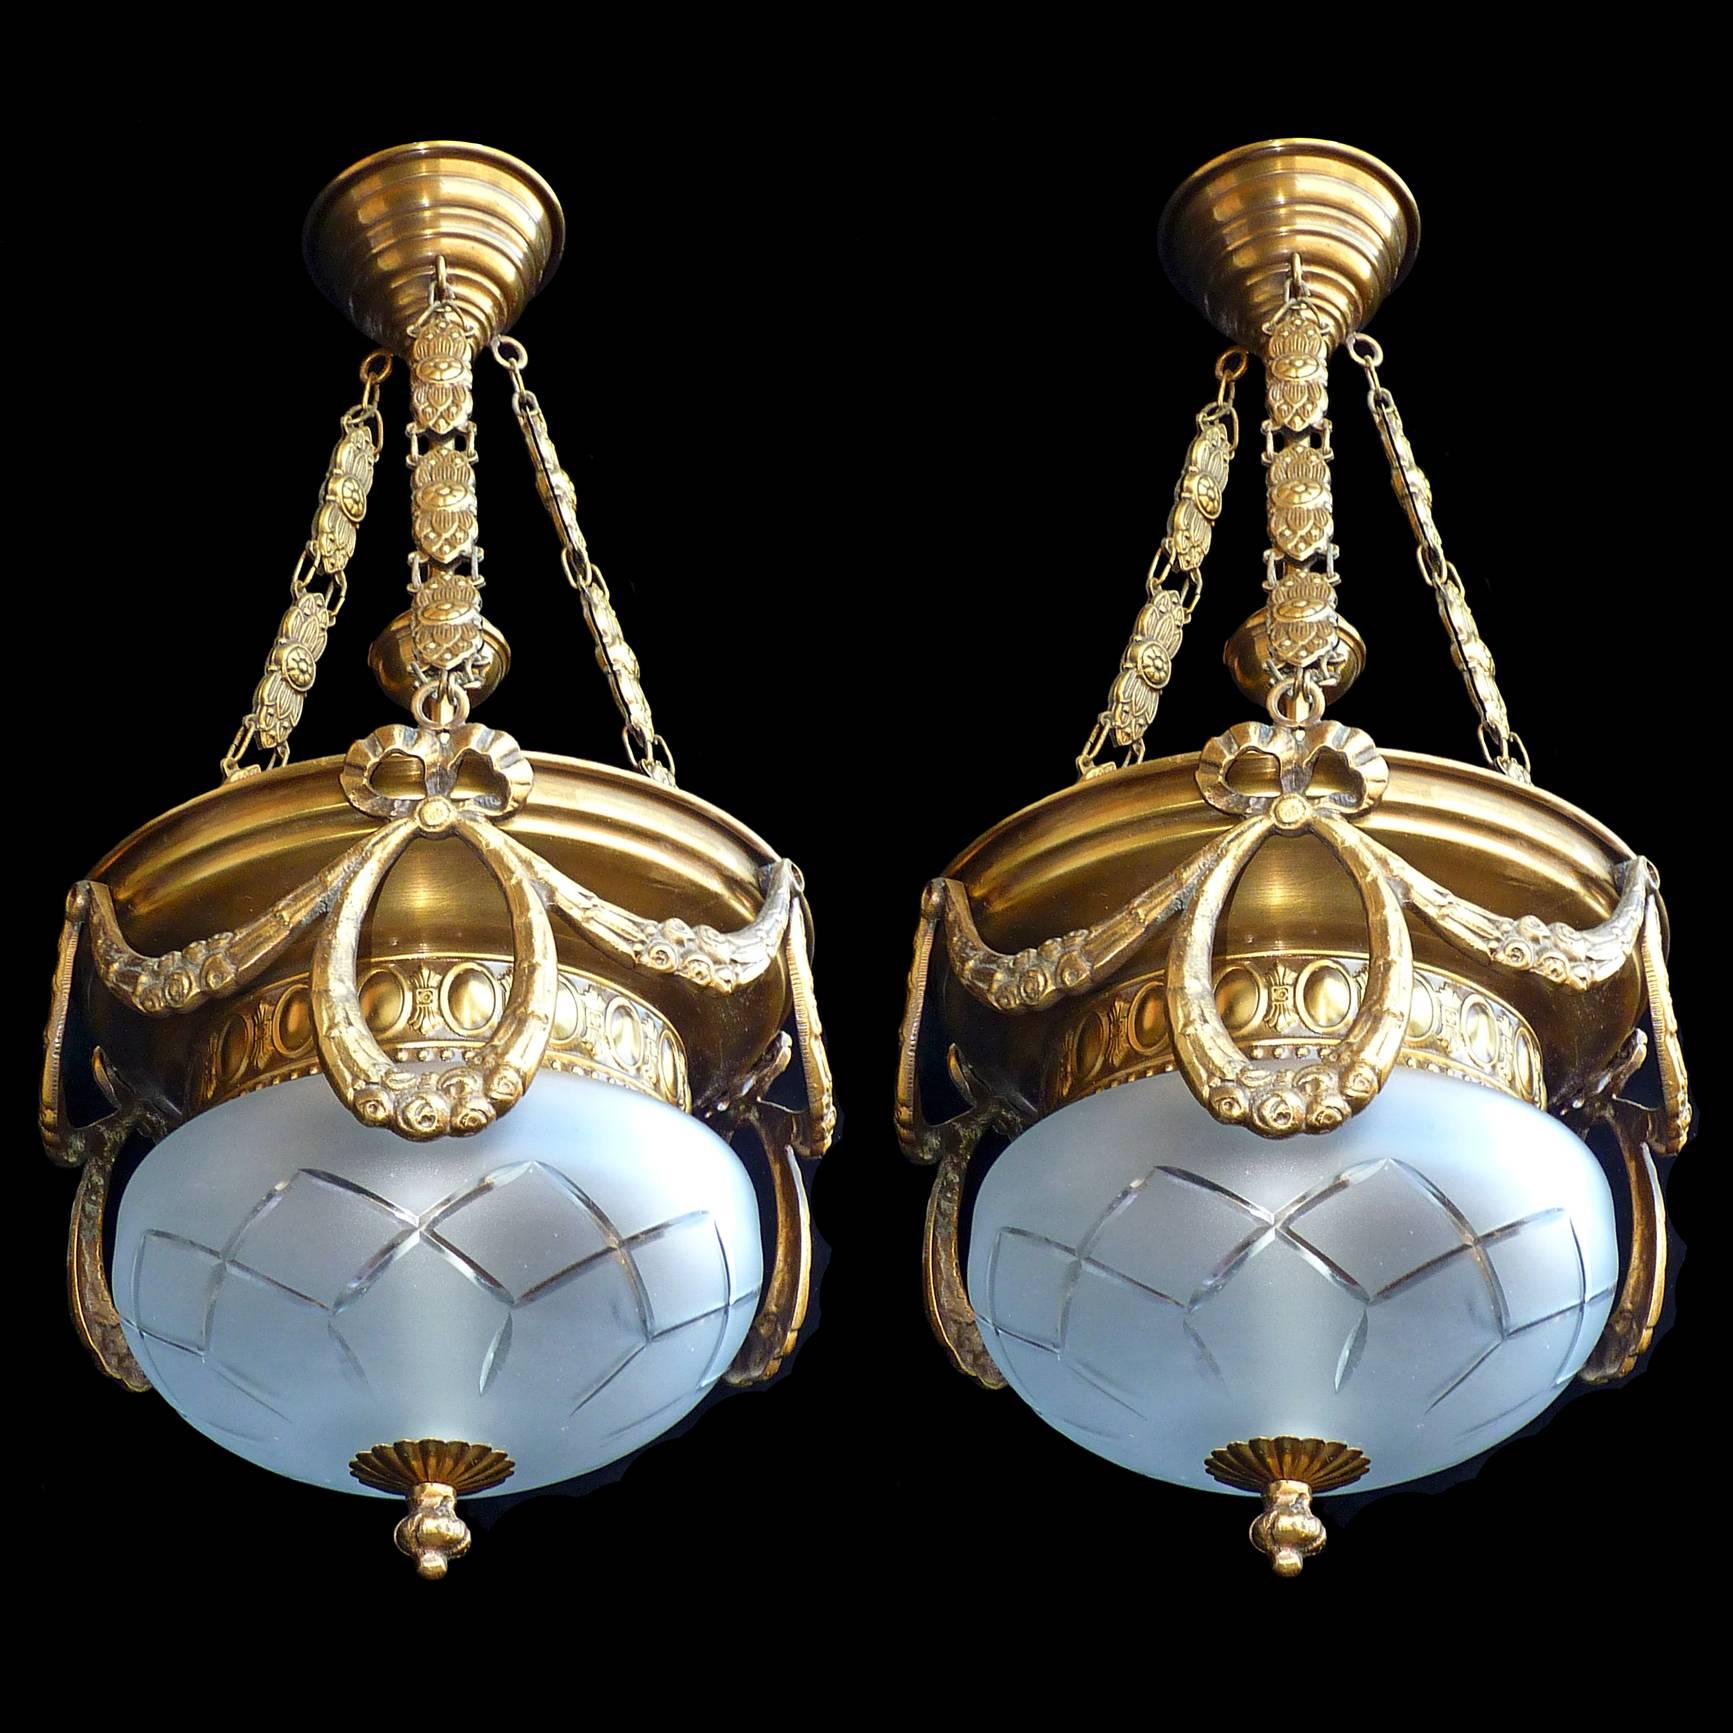 A pair of vintage brass French Art Deco/Art Nouveau gold and bronze color cut-glass chandeliers

Measures: Diameter 11 inches / 27 cm
Height 24 inches / 60 cm 
Weight: 10 lb. (4 kg)
Two bulbs (five bulbs each/ E14 
Good working condition /